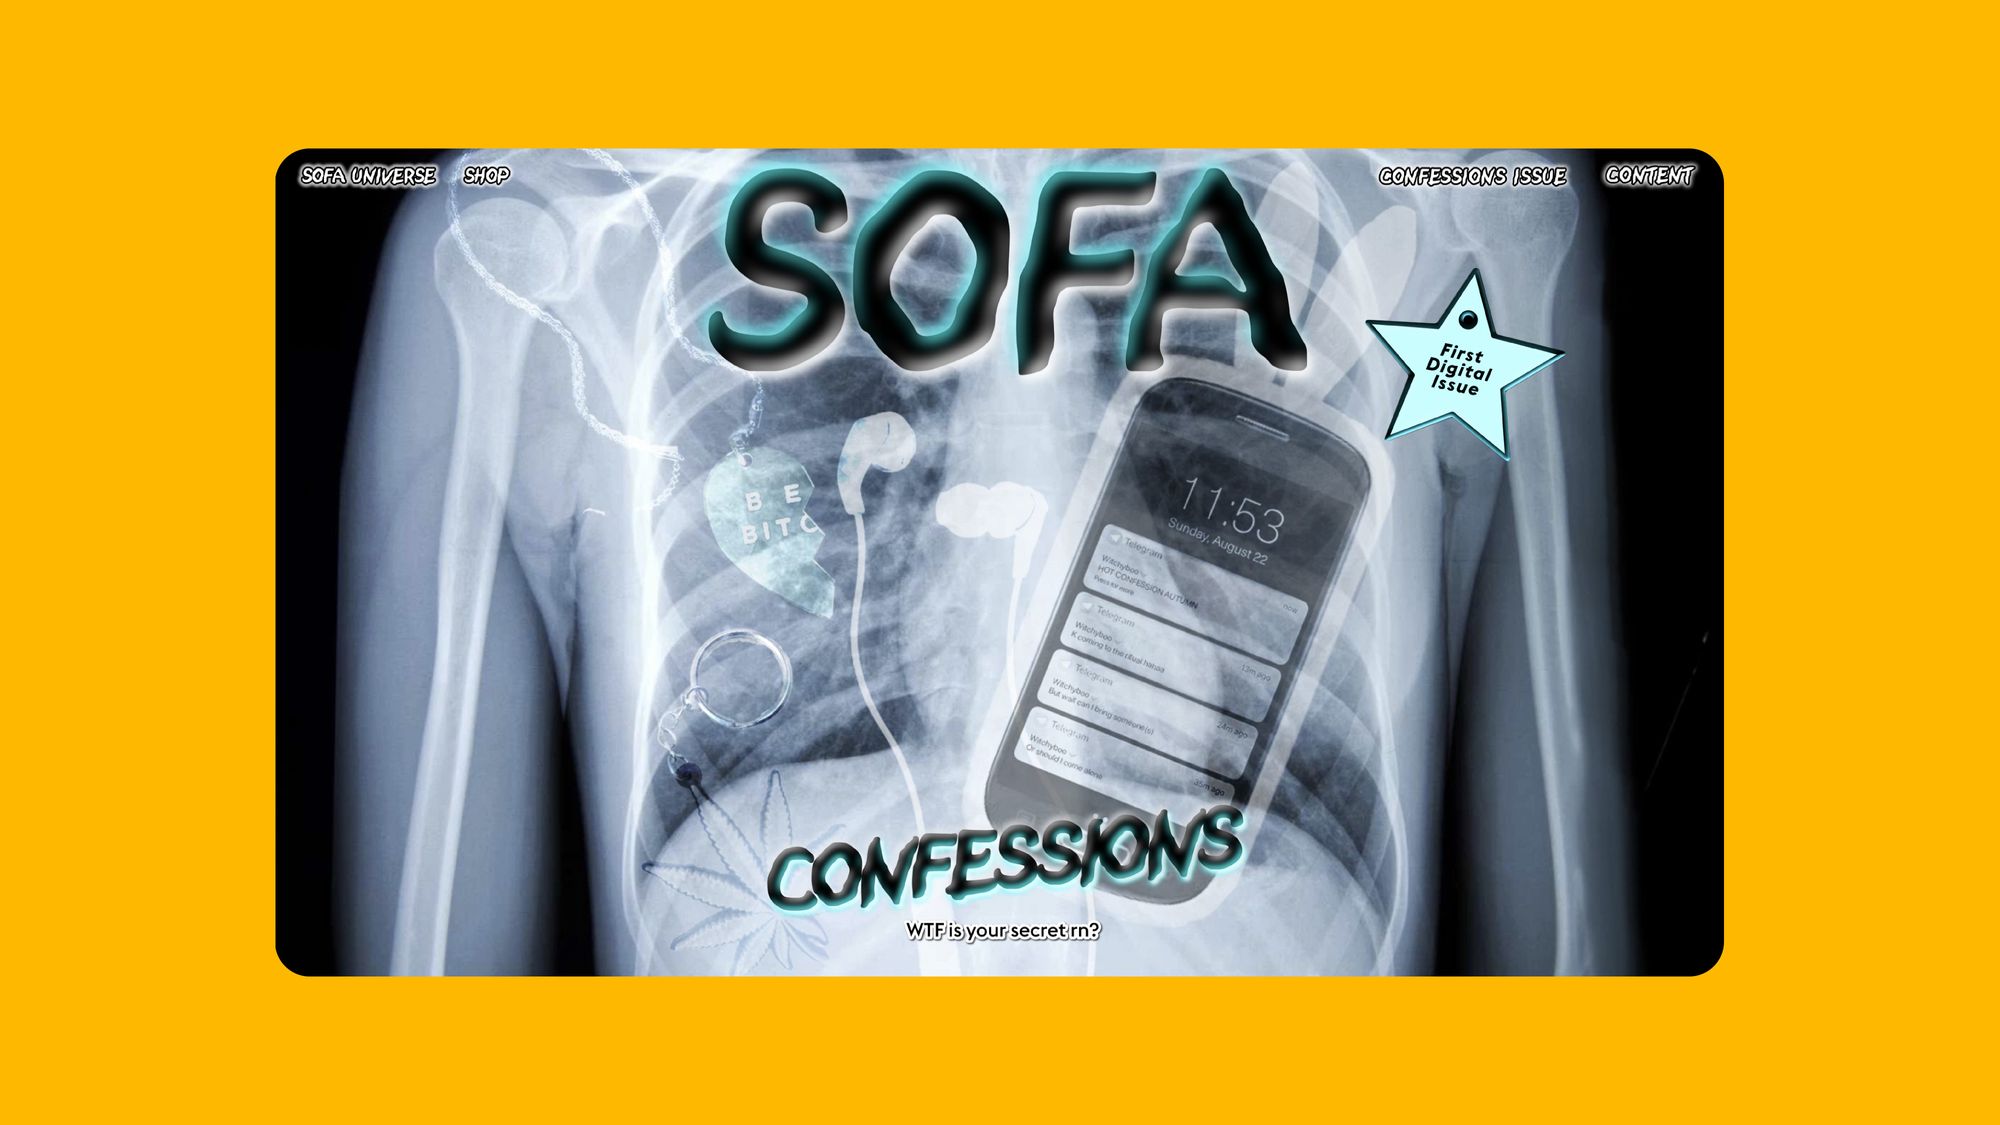 readymag blog_Going digital with Readymag: SOFA Magazine expands online